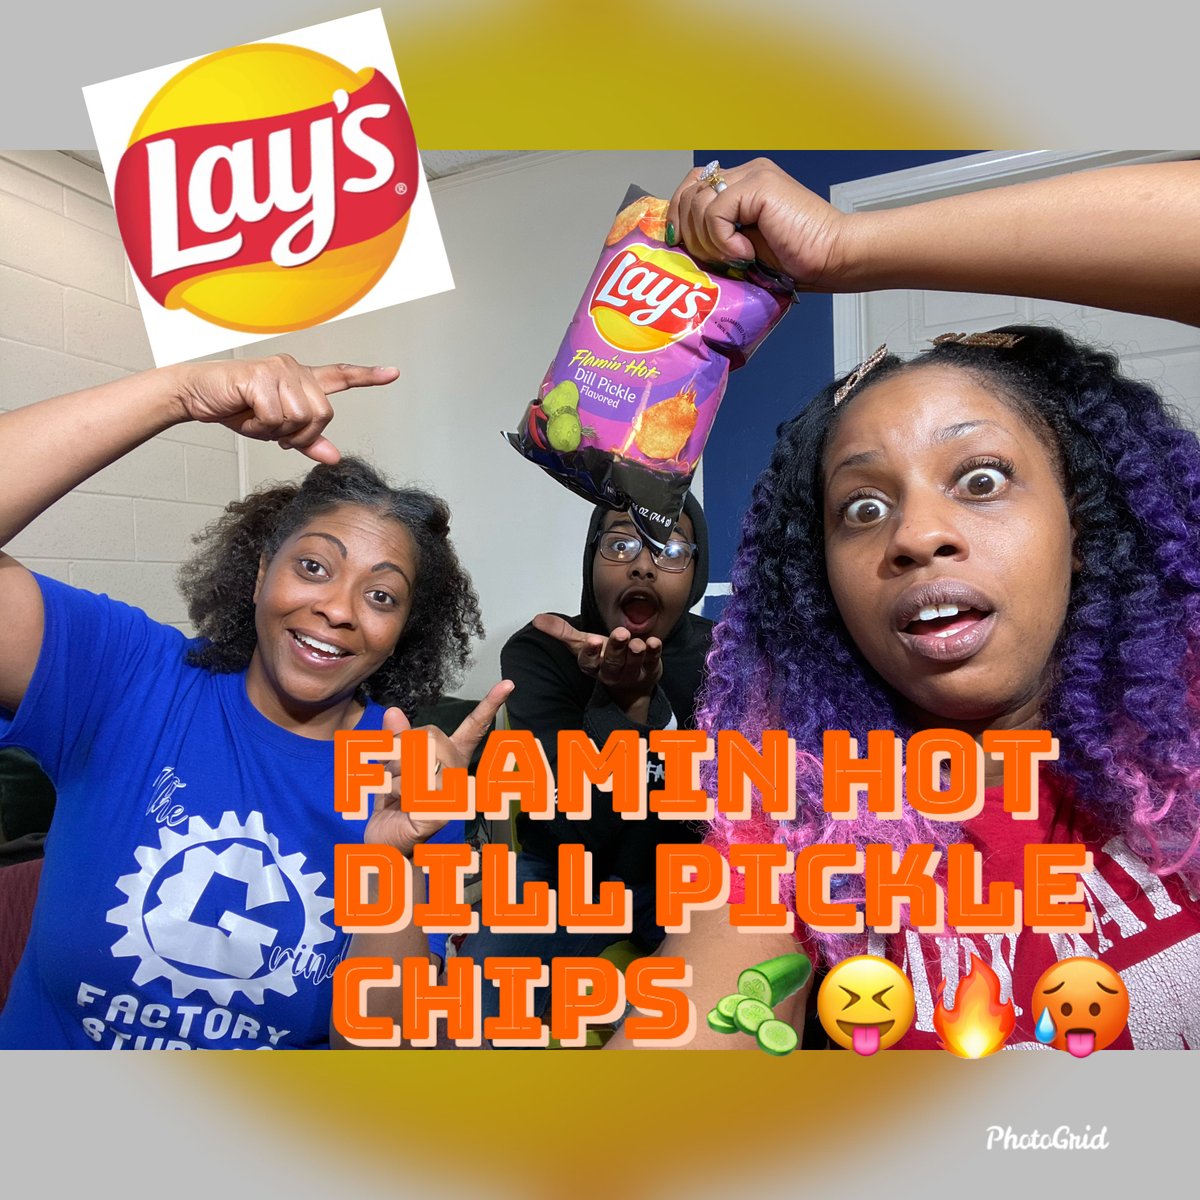 🥒🥵😝🔥
New #MajorShenanigans snack review of “Lay’s Flamin Hot Dill Pickle” Potato Chips ft @LadyKayne @MJKaneBooks @2kautious20 ⚙️⚙️⚙️
Full video on @YouTube ✅
youtu.be/4rsMWf8jrx4

#snackreview #lays #flaminhot #dillpickle #flaminhotdillpickle